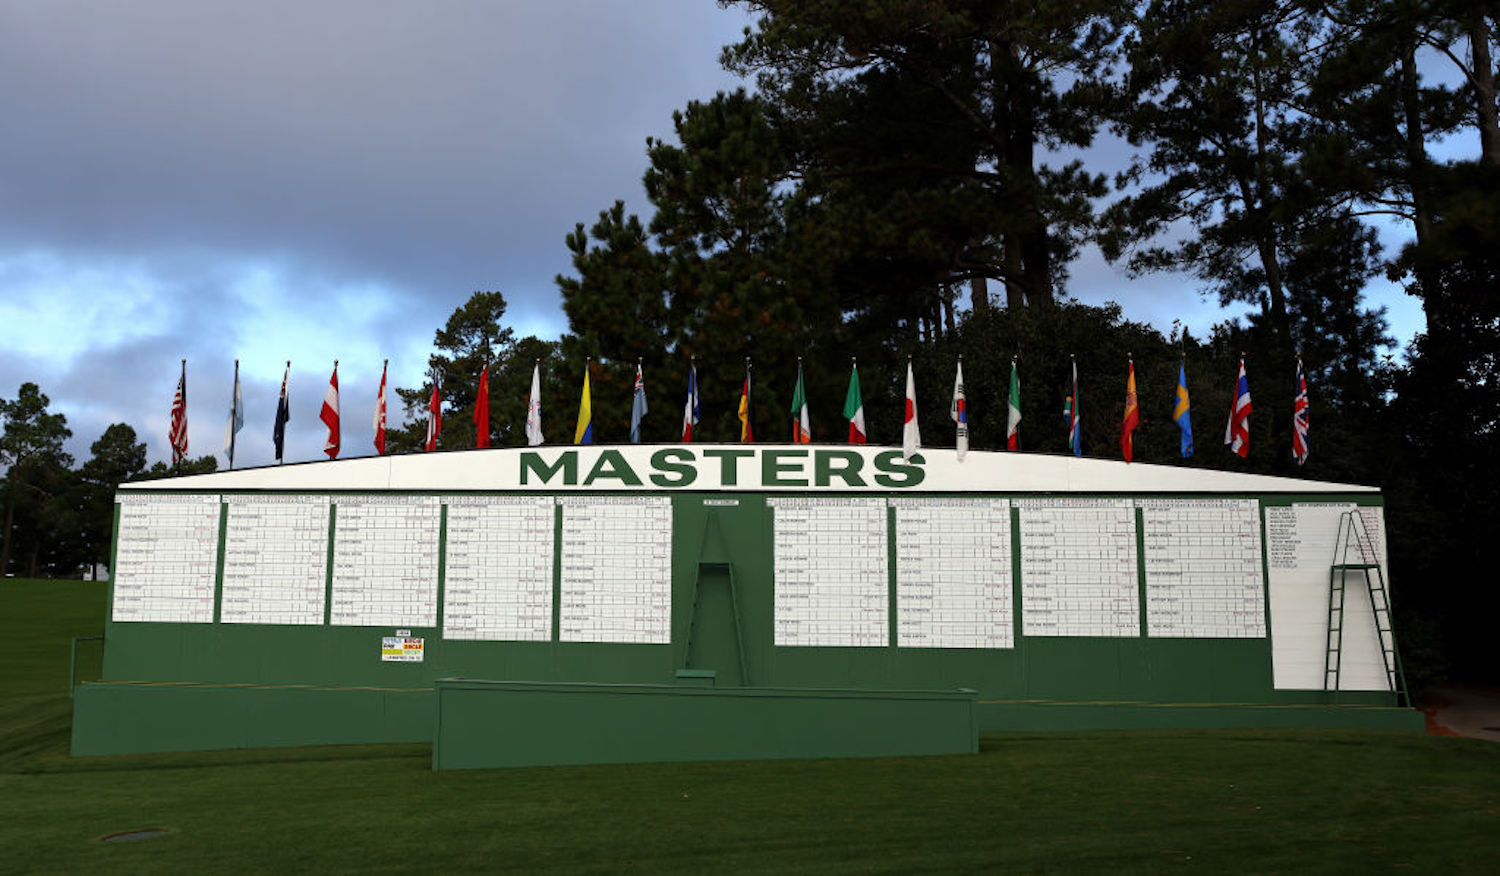 The Masters is finally here after a six-month delay. Who enters the tournament as the favorite, and who should you target with your bets?